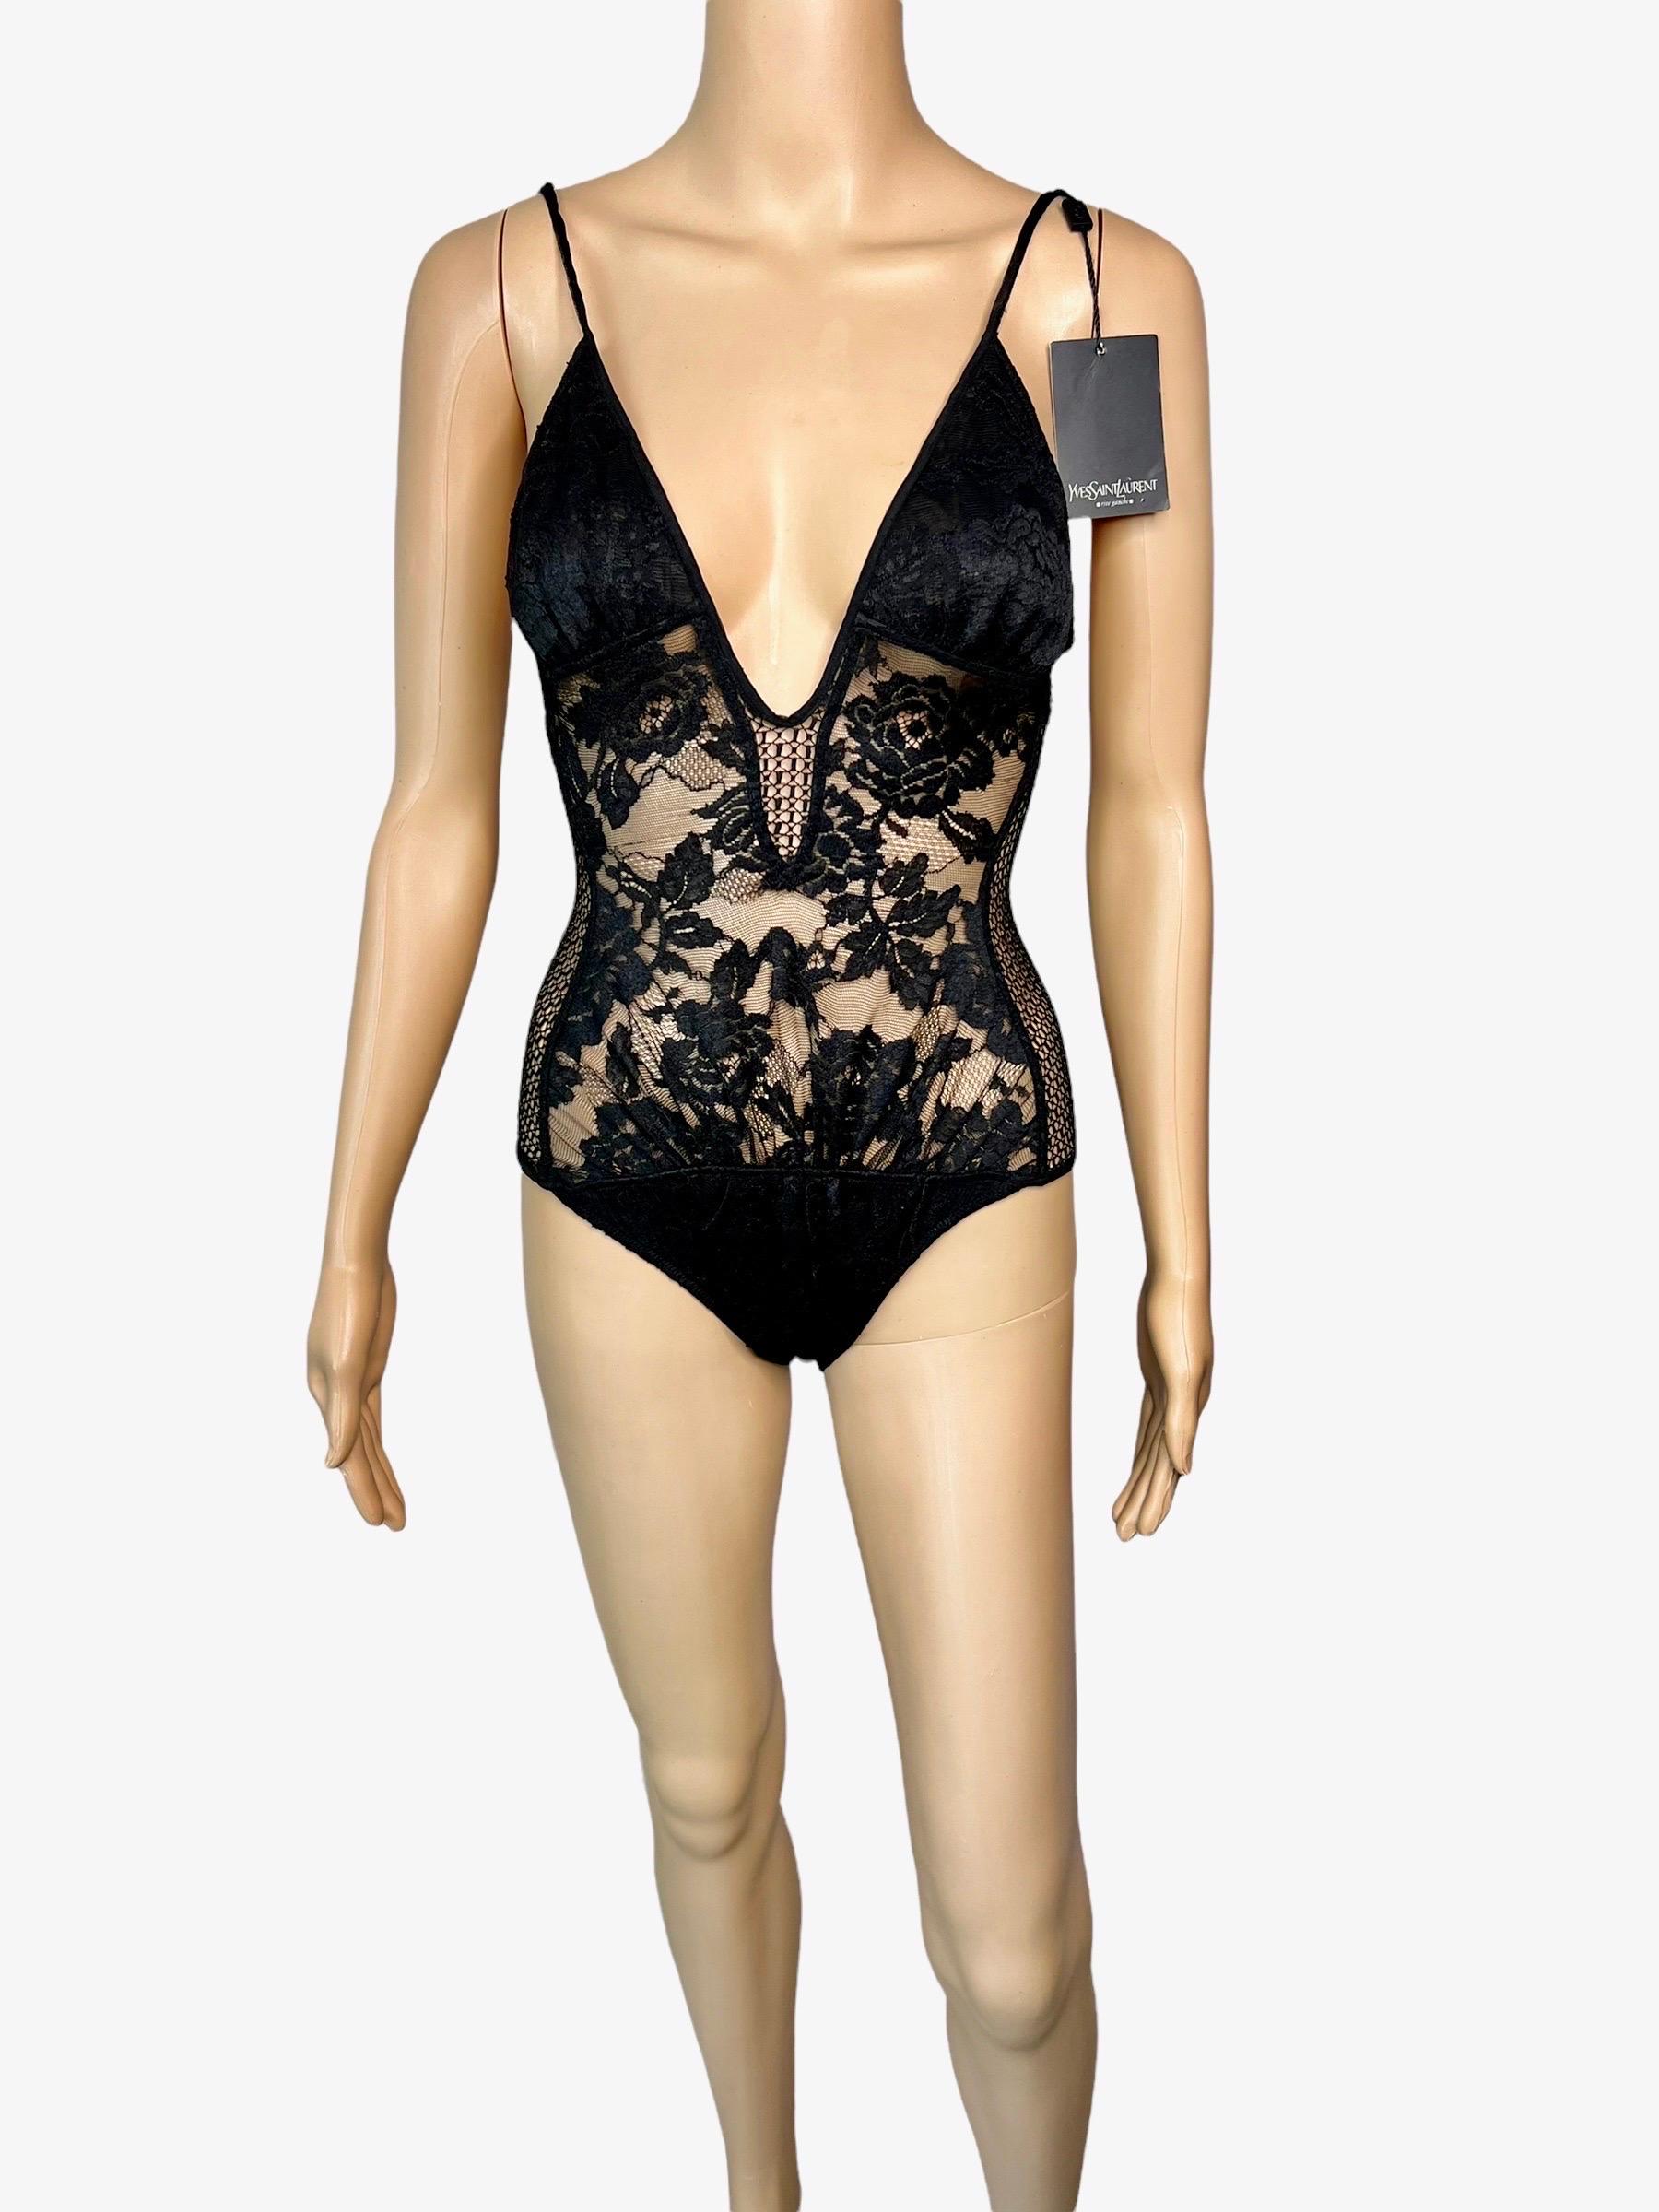 Tom Ford for Yves Saint Laurent YSL c.2002 Sheer Lace Fishnet Black Bodysuit Top In Excellent Condition For Sale In Naples, FL